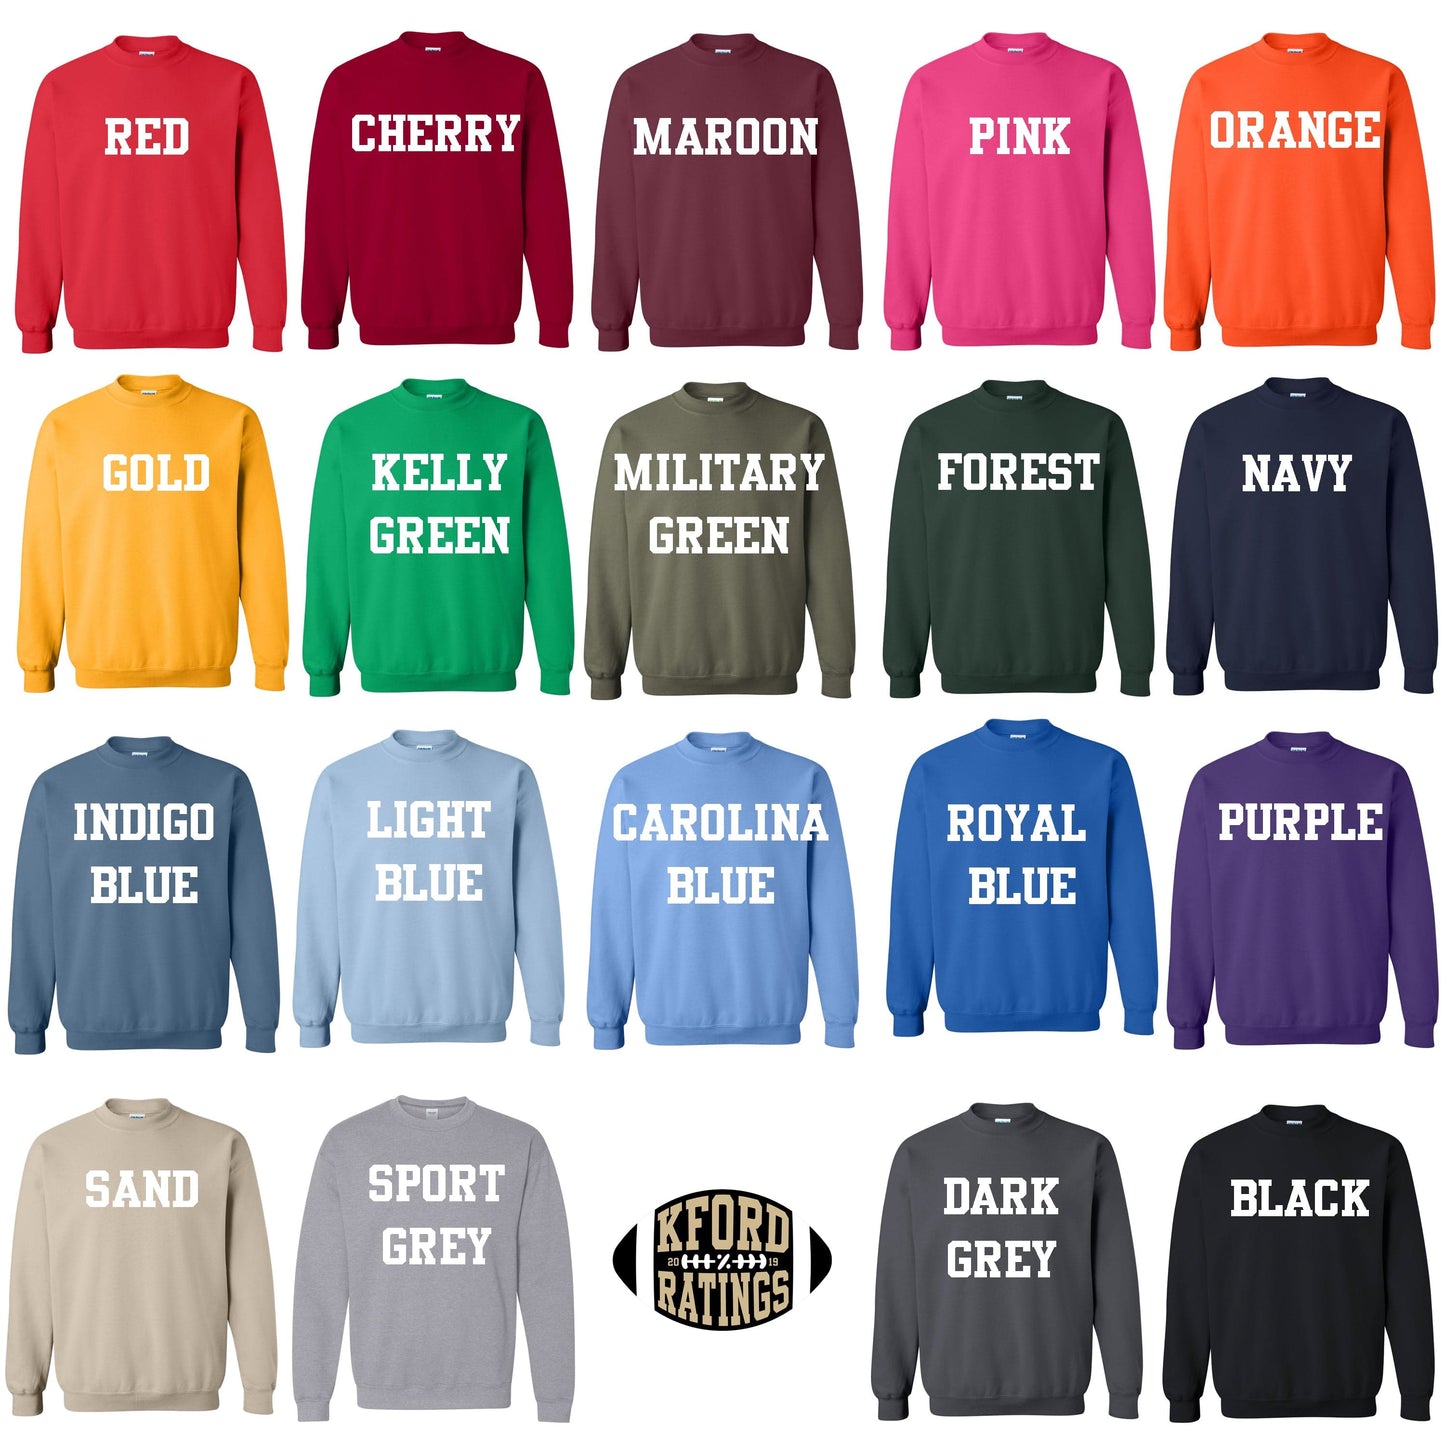 Only Casuals Leave Early Sweatshirt